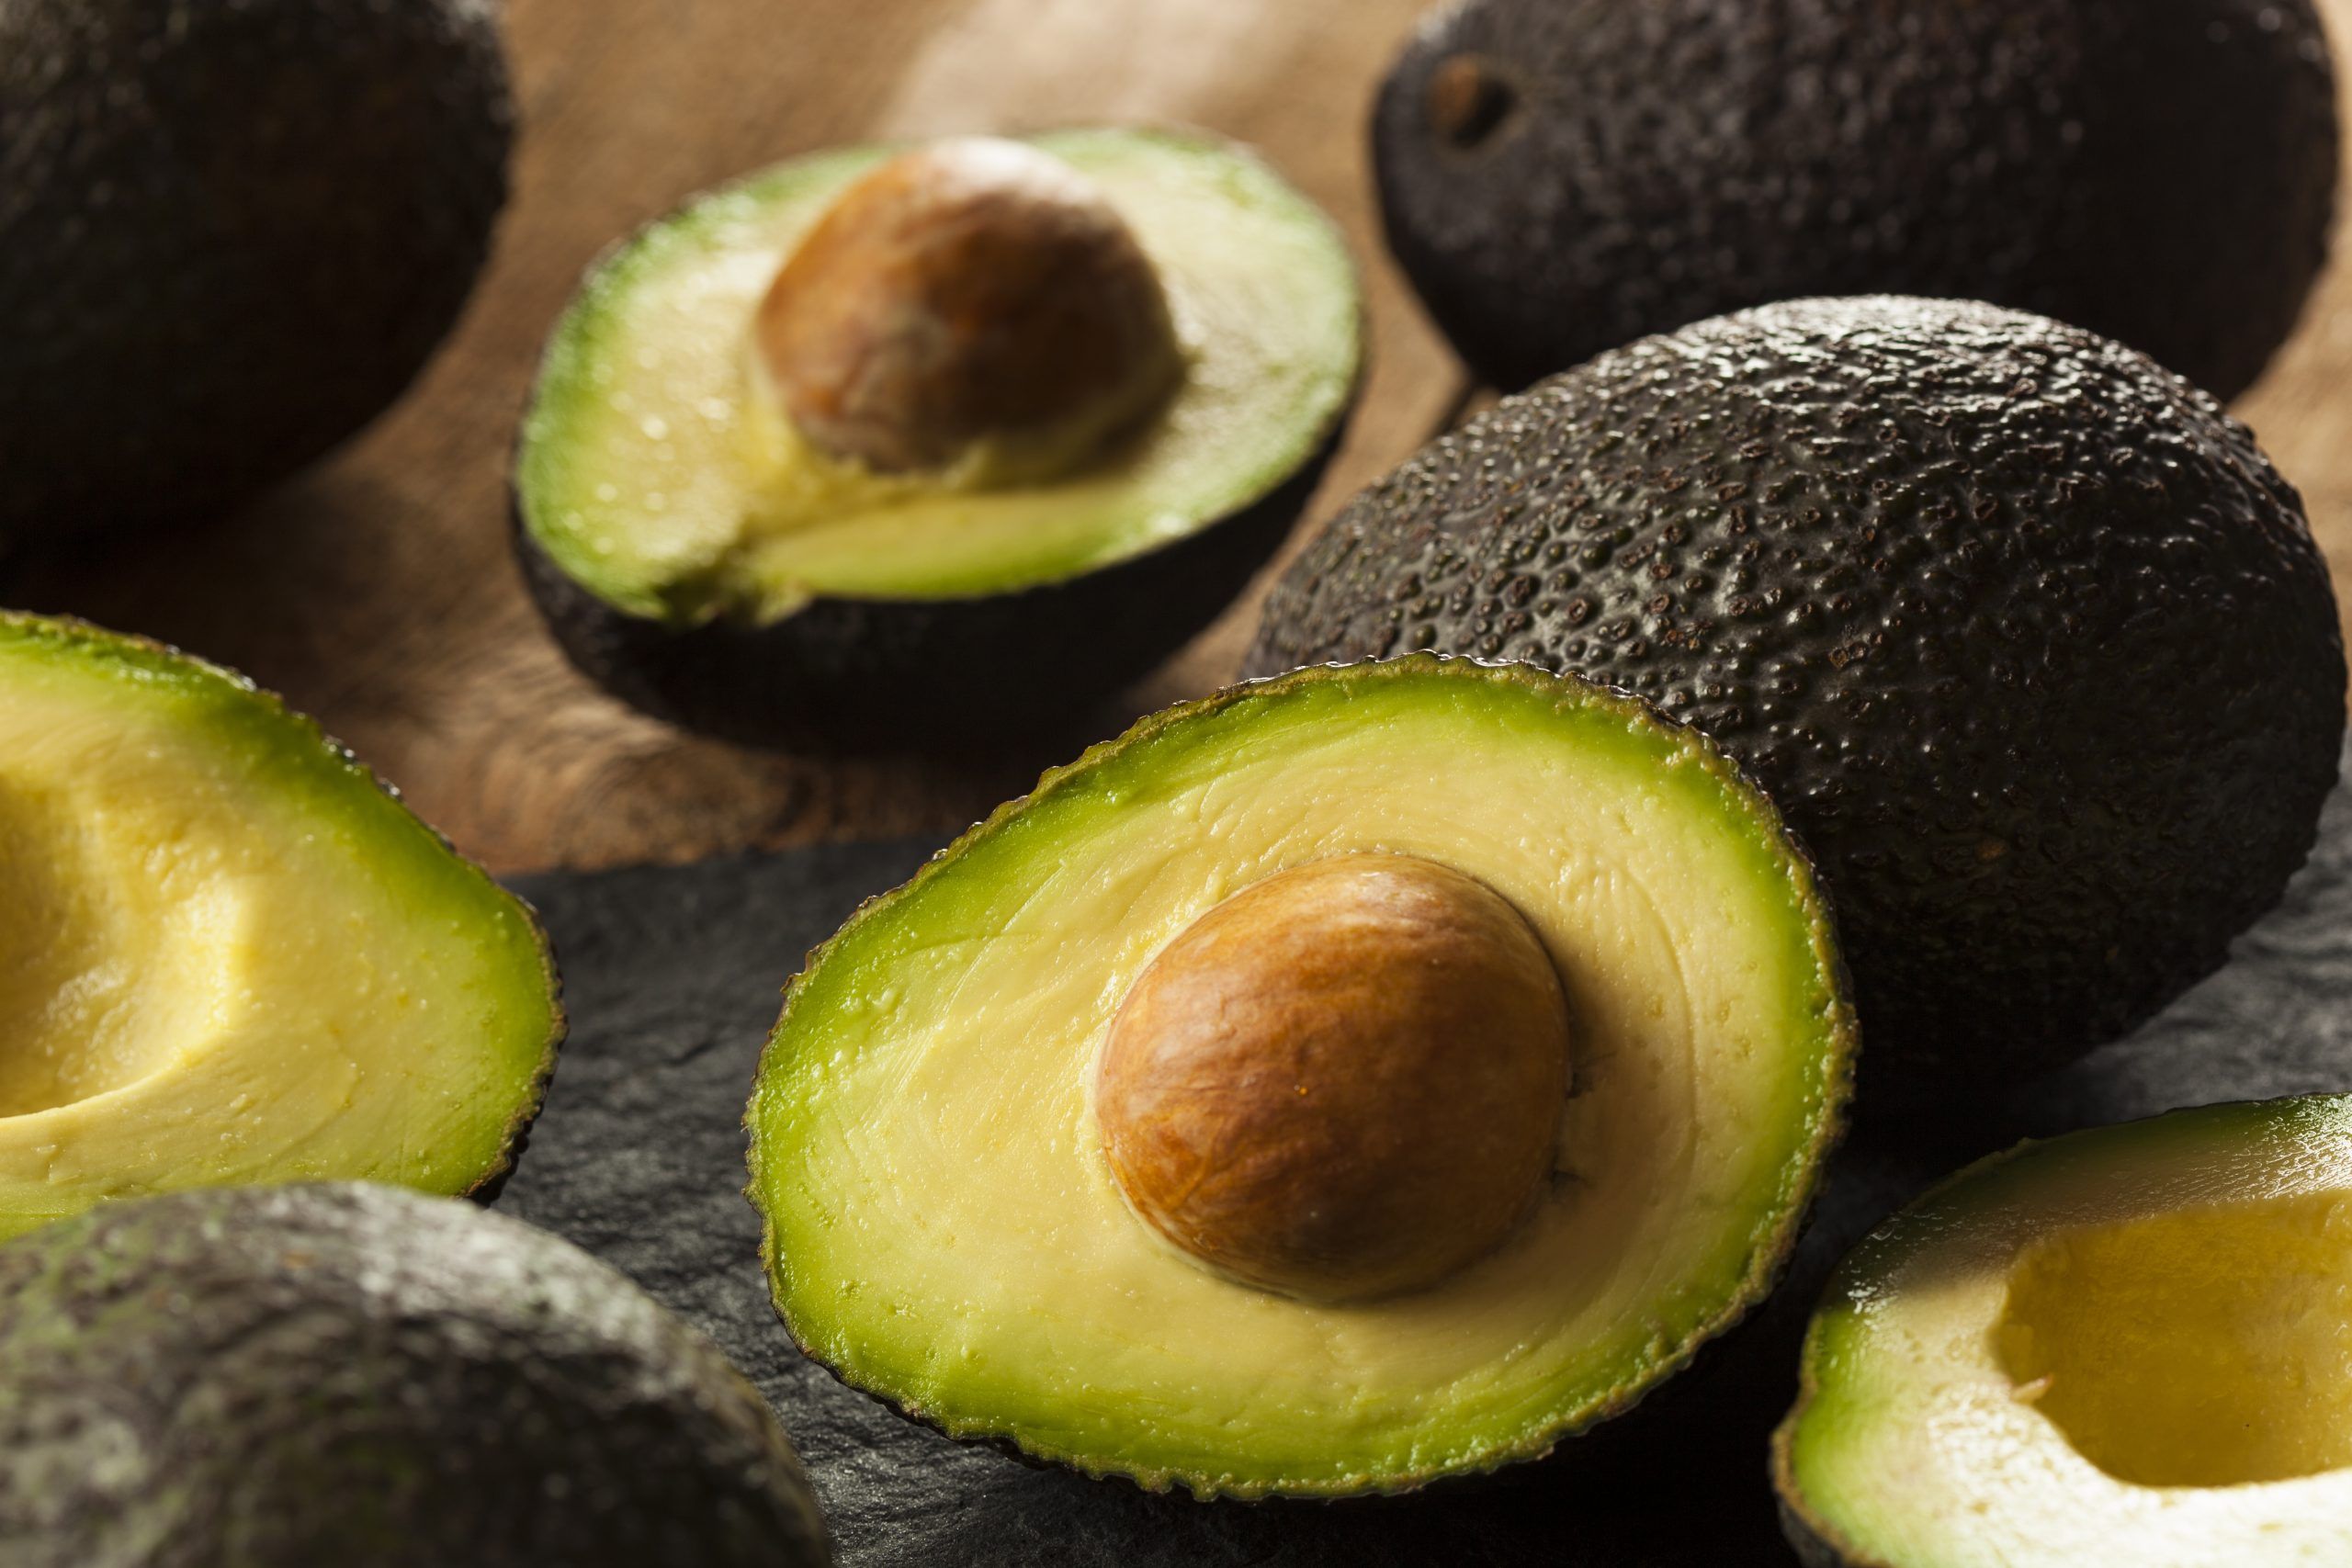 Avocado may protect against the effects of air pollution